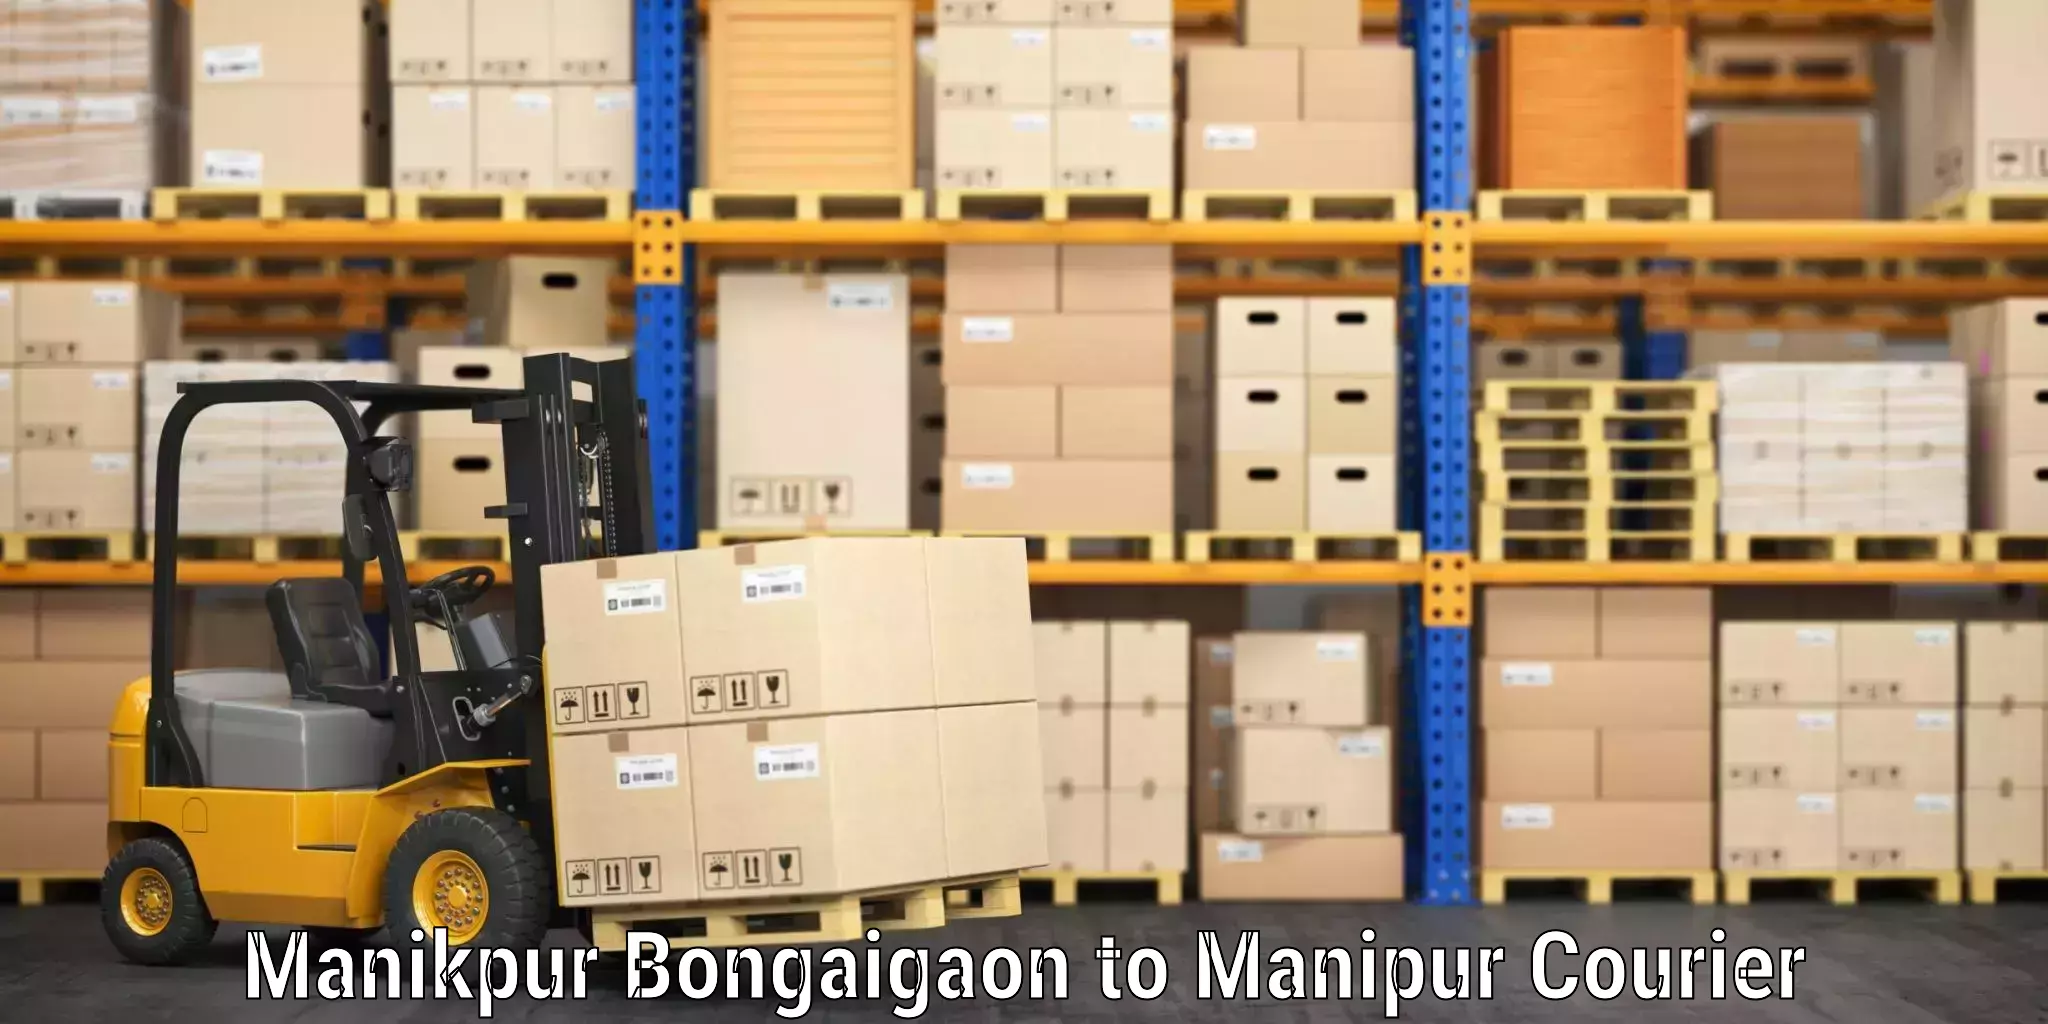 Luggage storage and delivery Manikpur Bongaigaon to Tamenglong